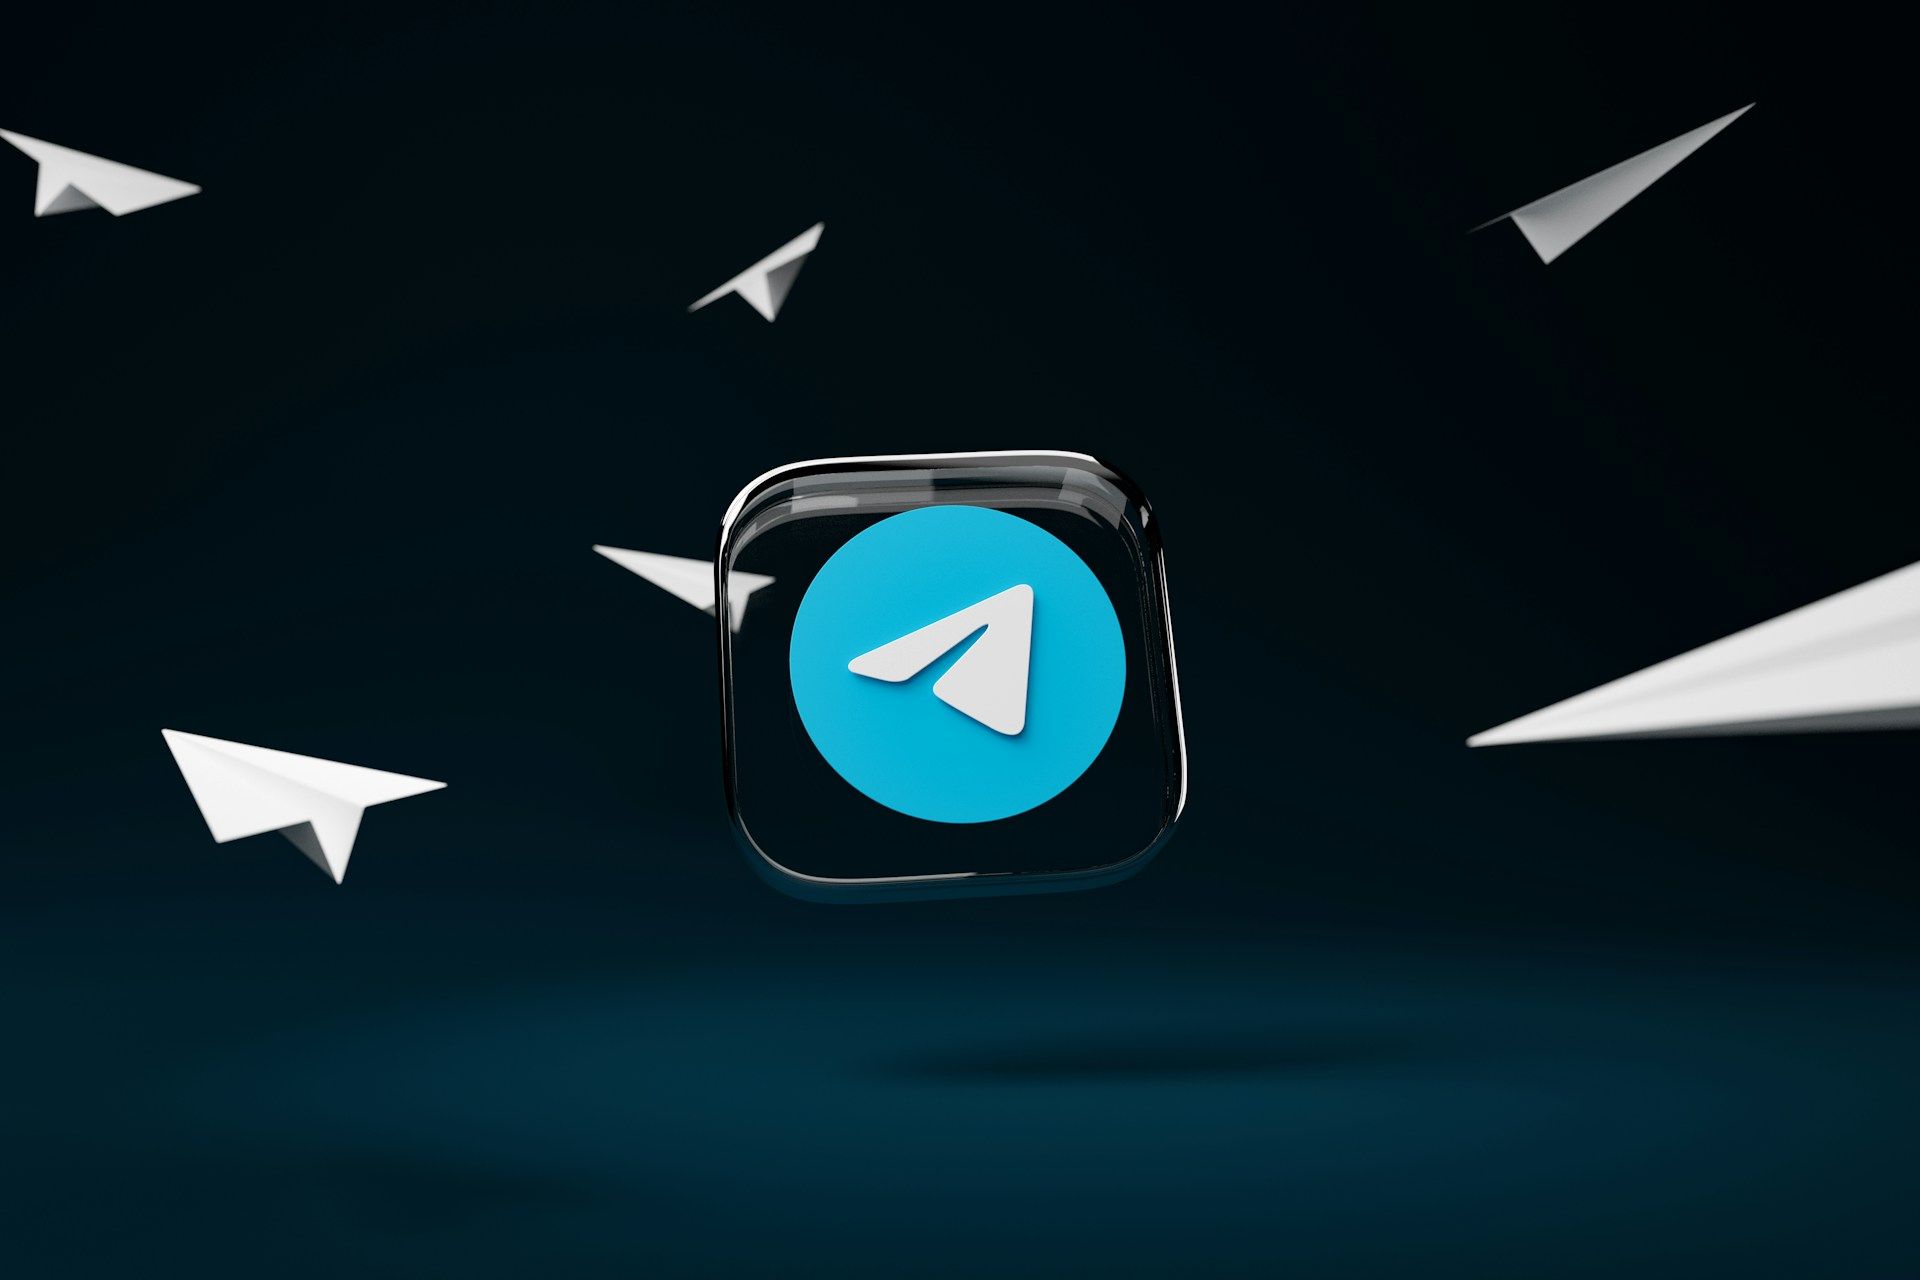 Telegram logo with a blue button with a white arrow on it